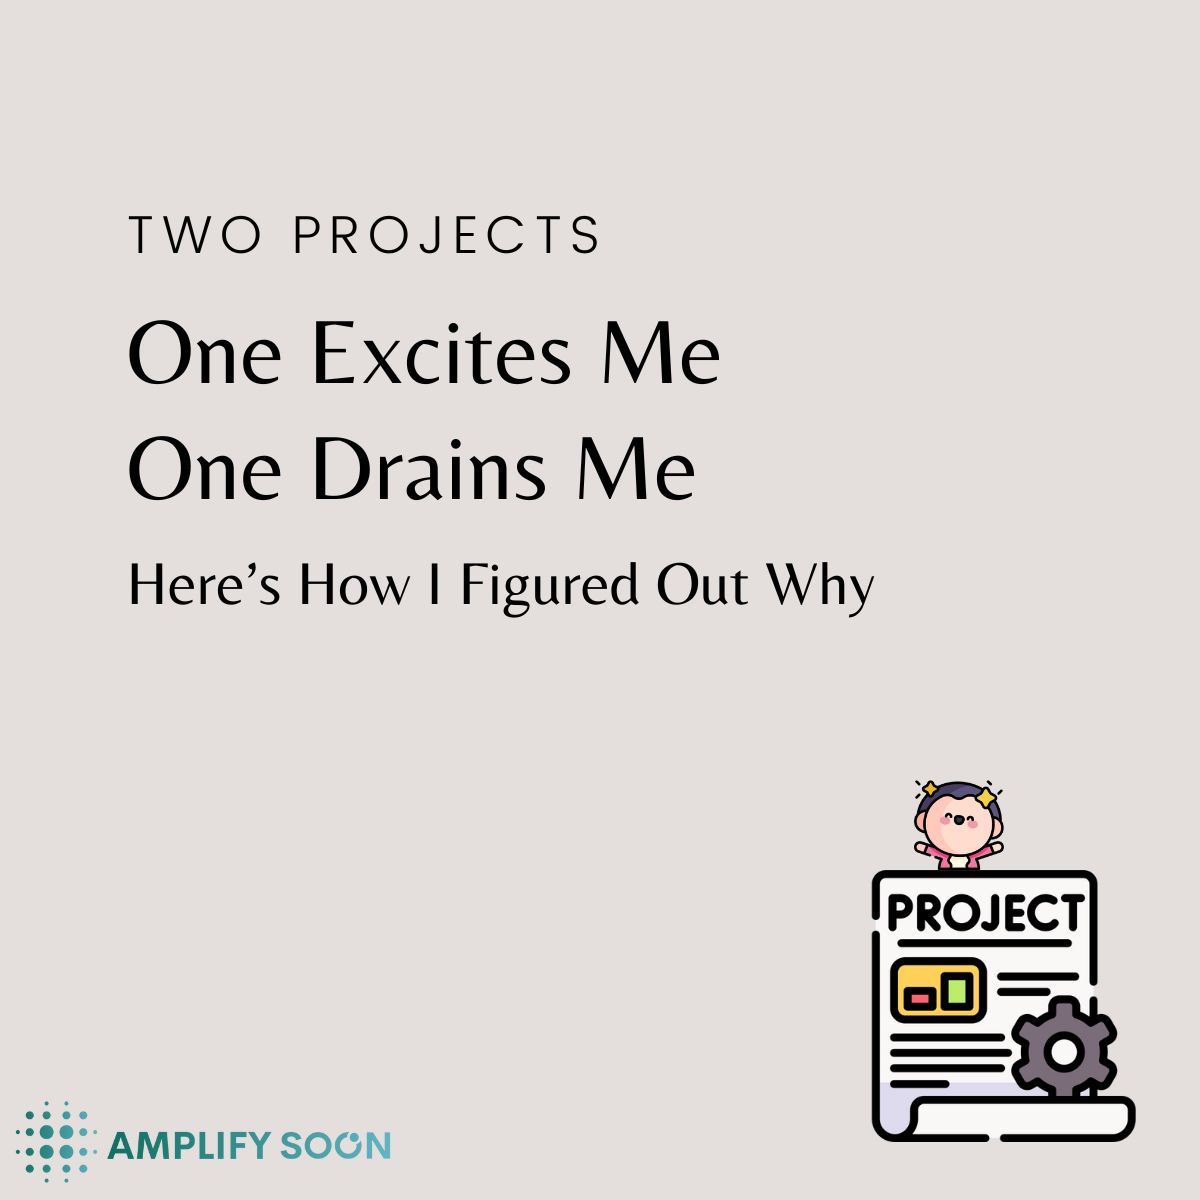 🚦I took on two new projects to manage
🚦Two projects of completely opposite characteristics. 

🚦As I got started with both, I quickly realized one of these energizes me, and the other one drains me. What is your guess? 

🚦Here's how I figured it out: ... more👇